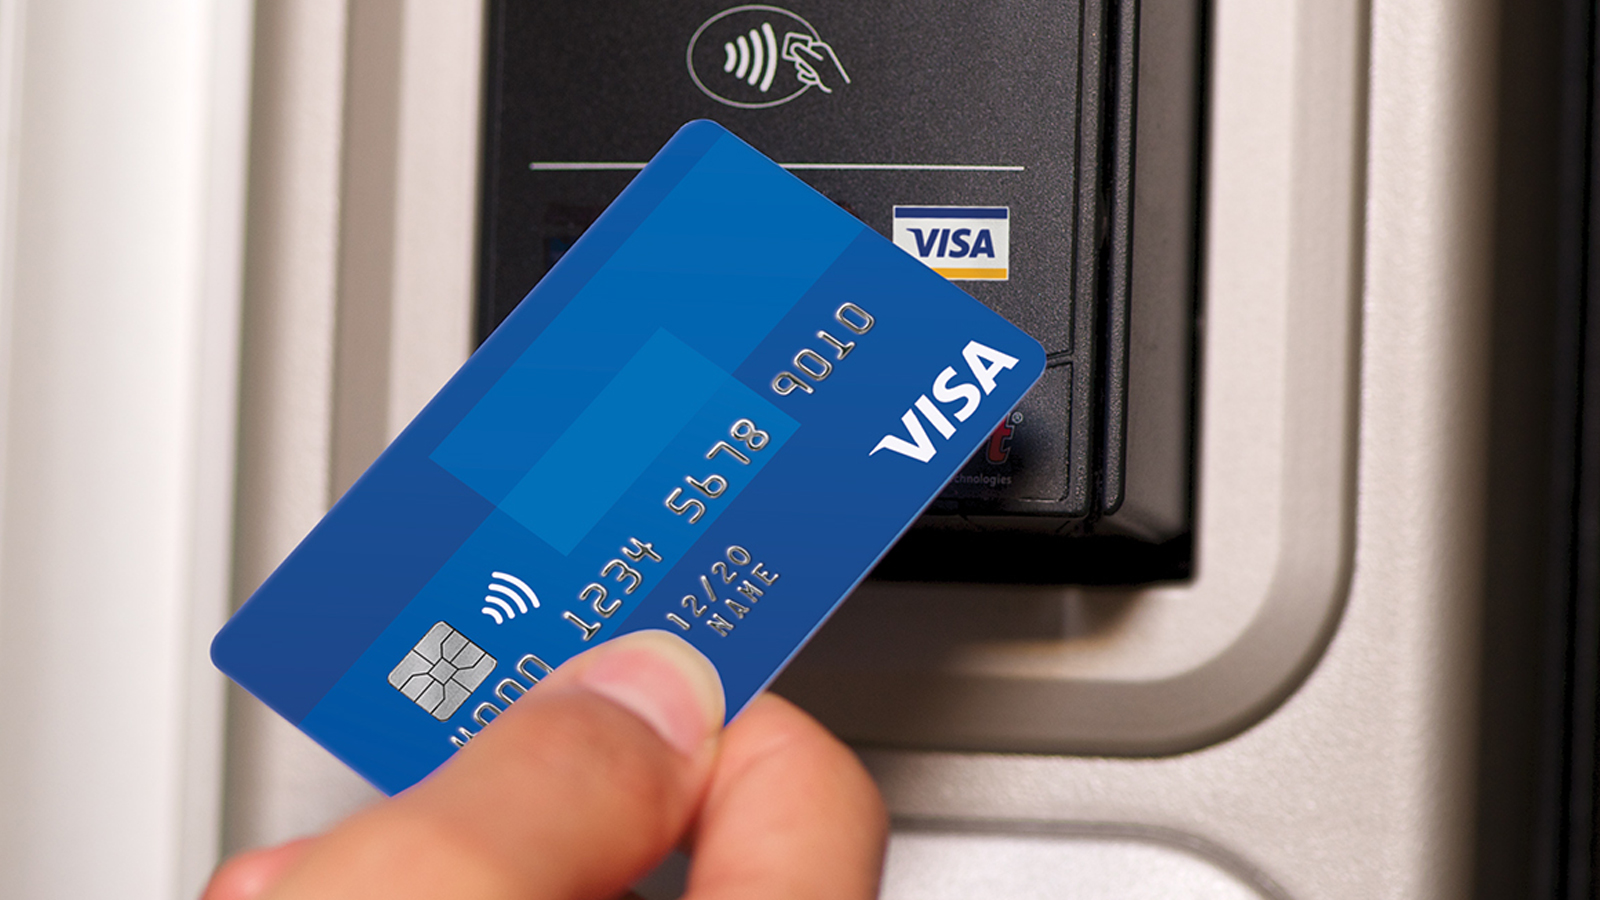 Tapping Visa card  with Visa's contactless payments system.